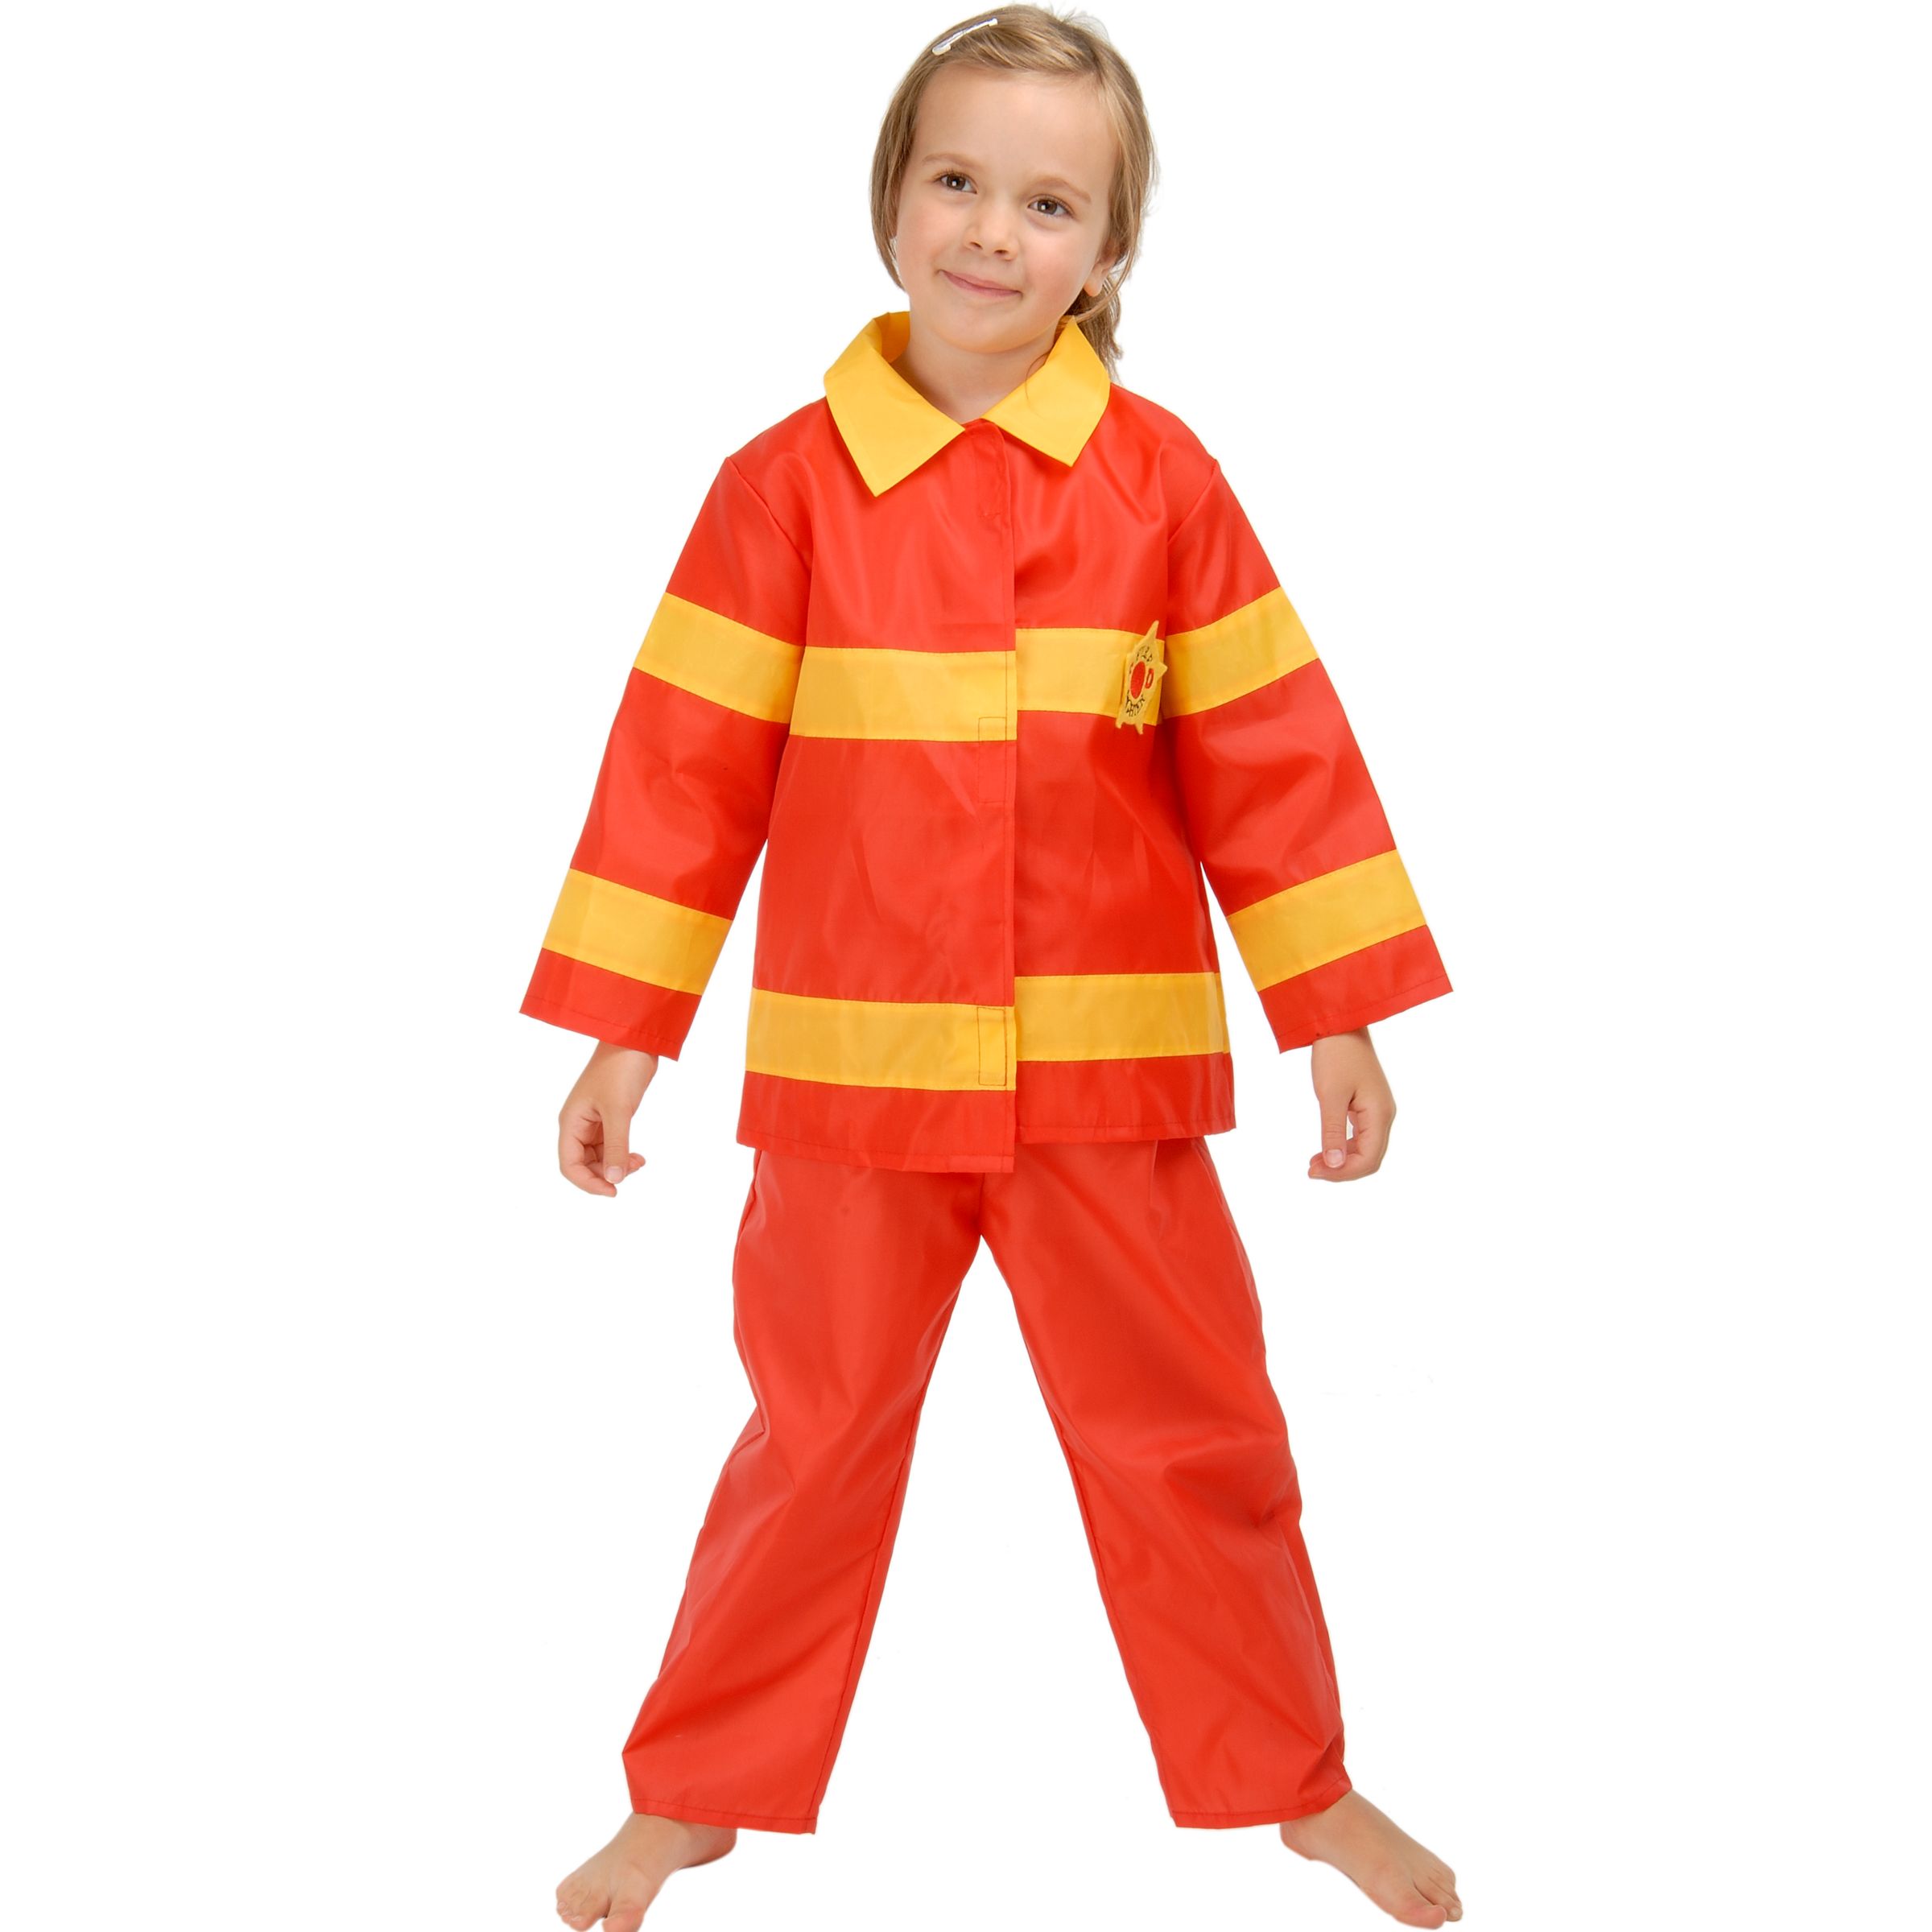 Fireman Outfit, 3-5 years